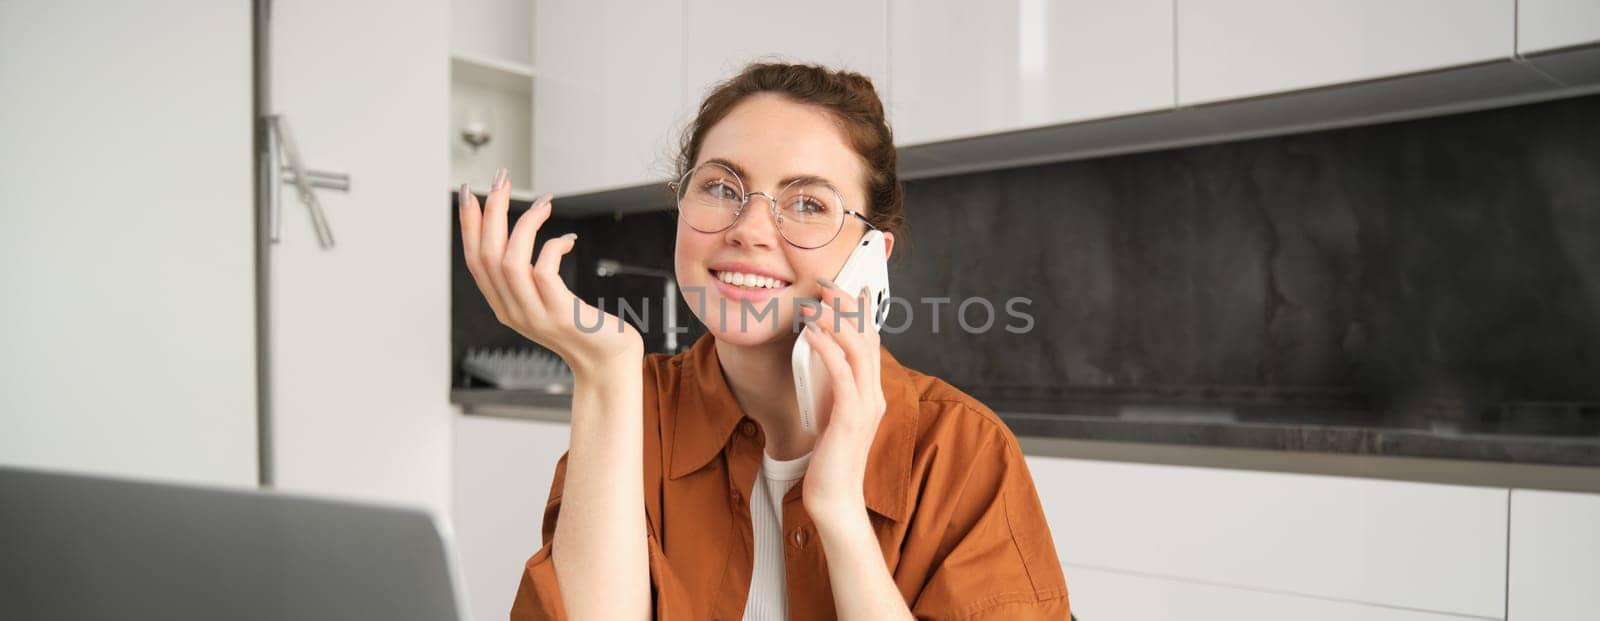 Portrait of young woman, business owner working from home, student making a phone call, sitting in kitchen with laptop, talking to someone.